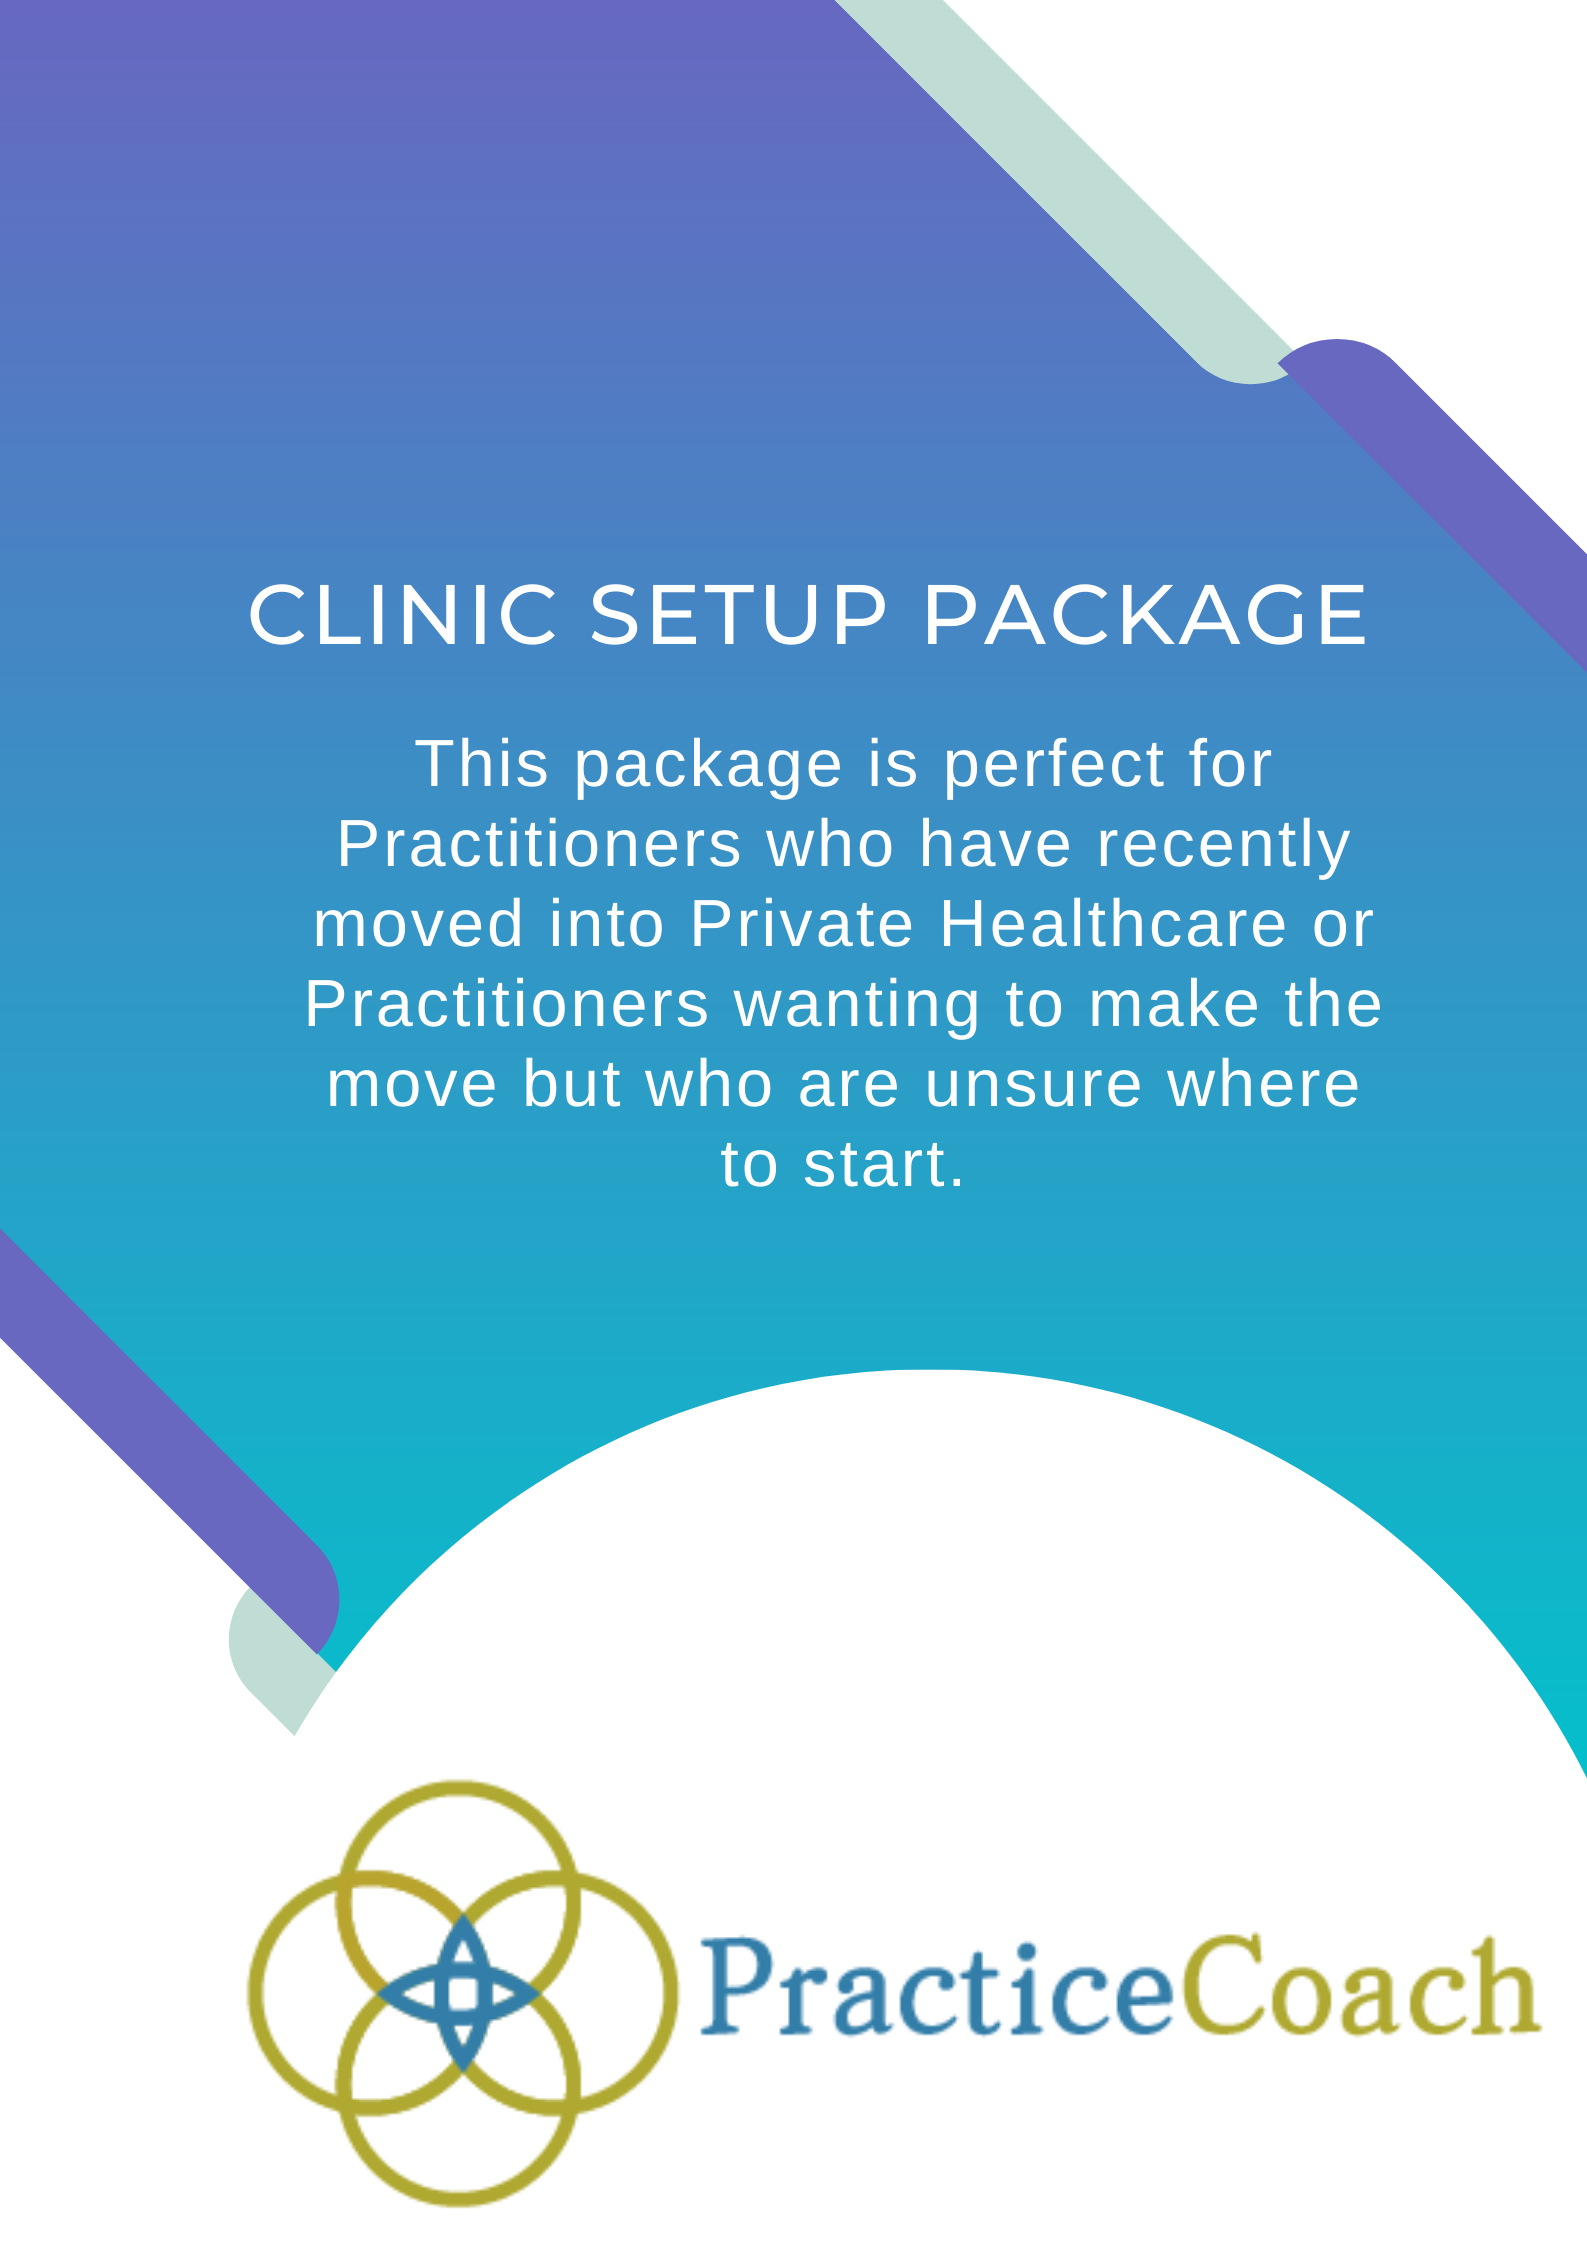 Clinic Setup Package - Practice Coach Clinic